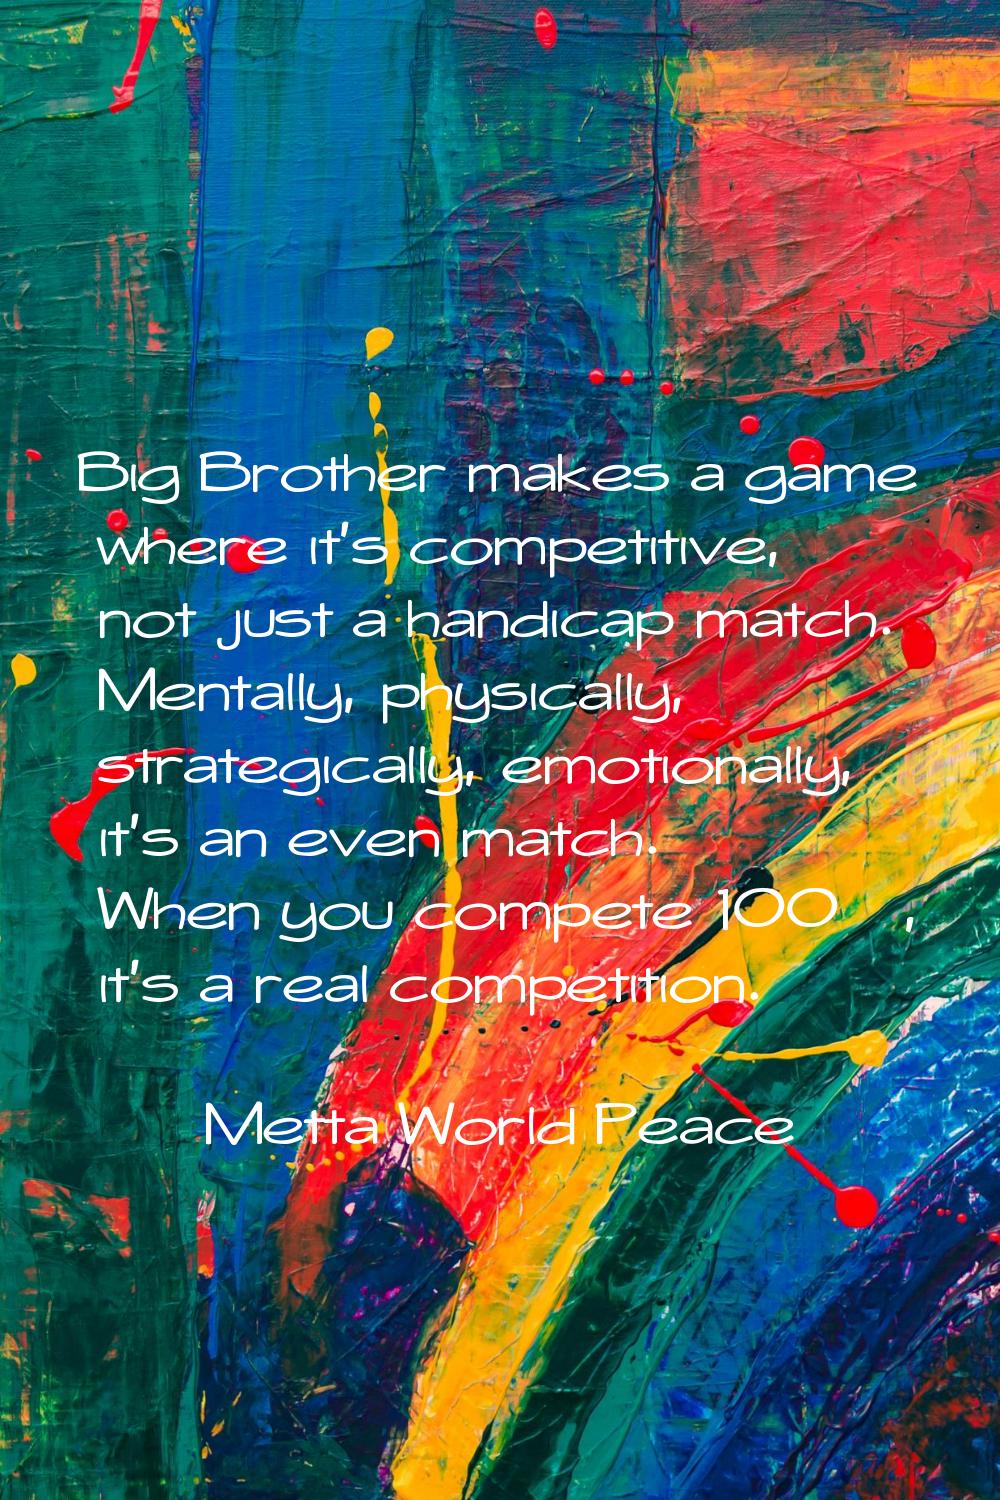 Big Brother makes a game where it's competitive, not just a handicap match. Mentally, physically, s